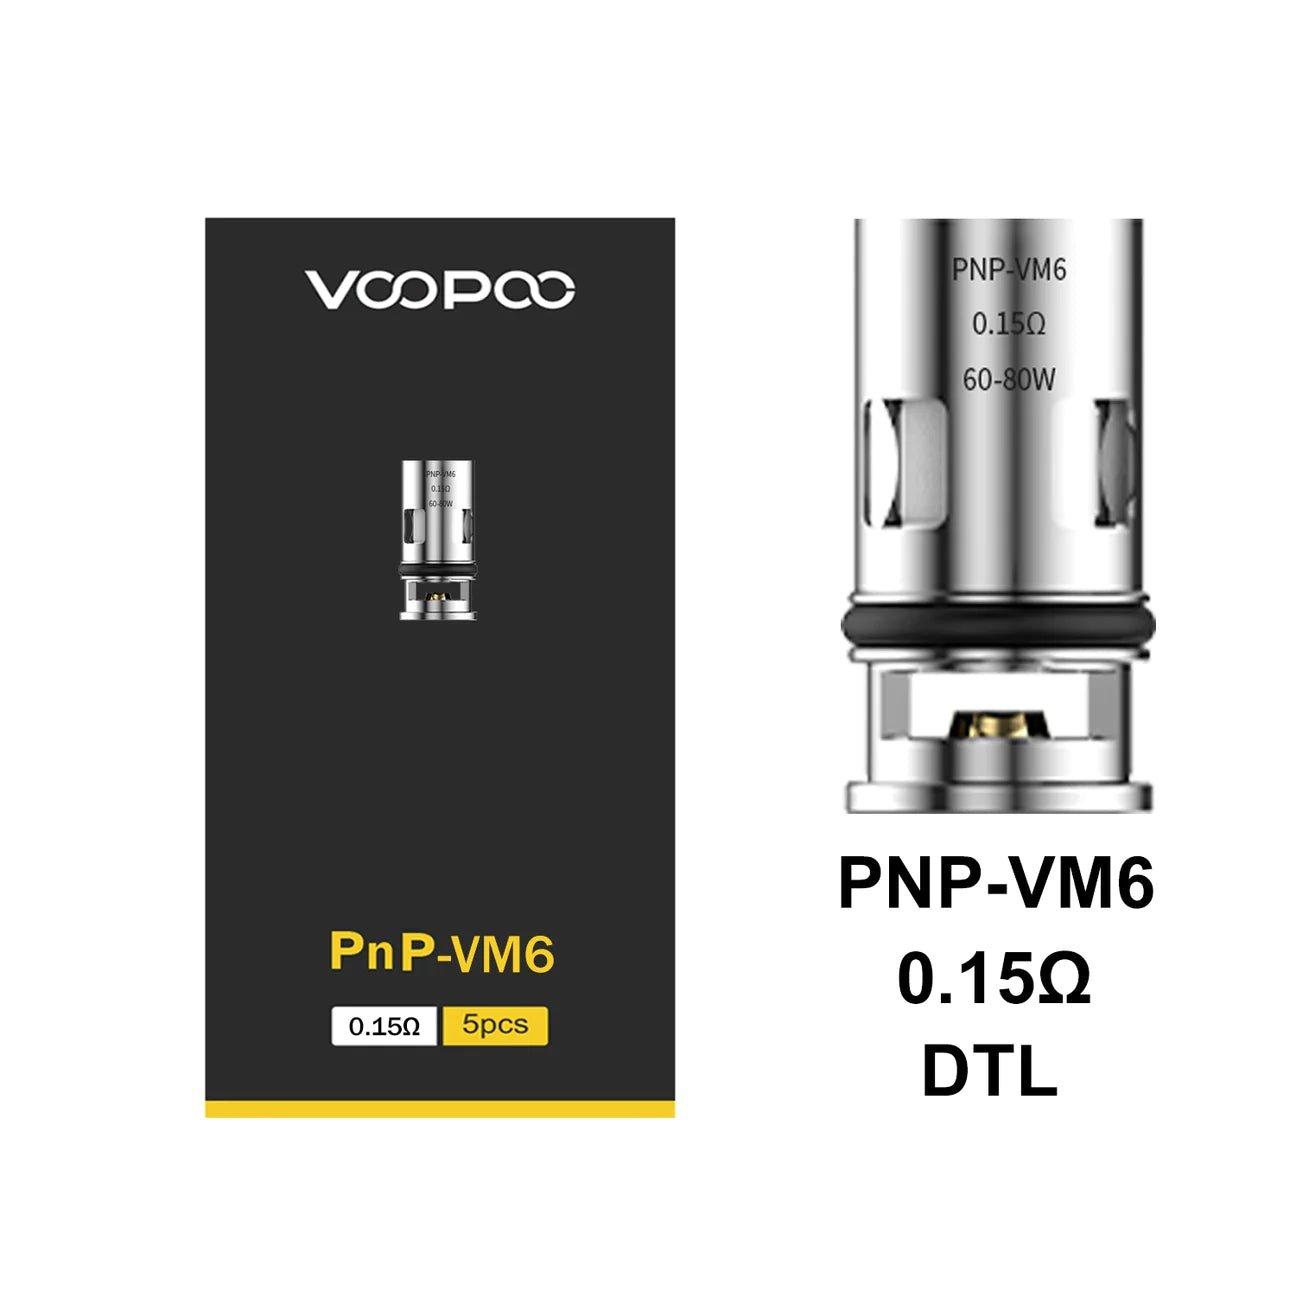 Voopoo PnP Replacement Coils - 5 Coils Per Pack